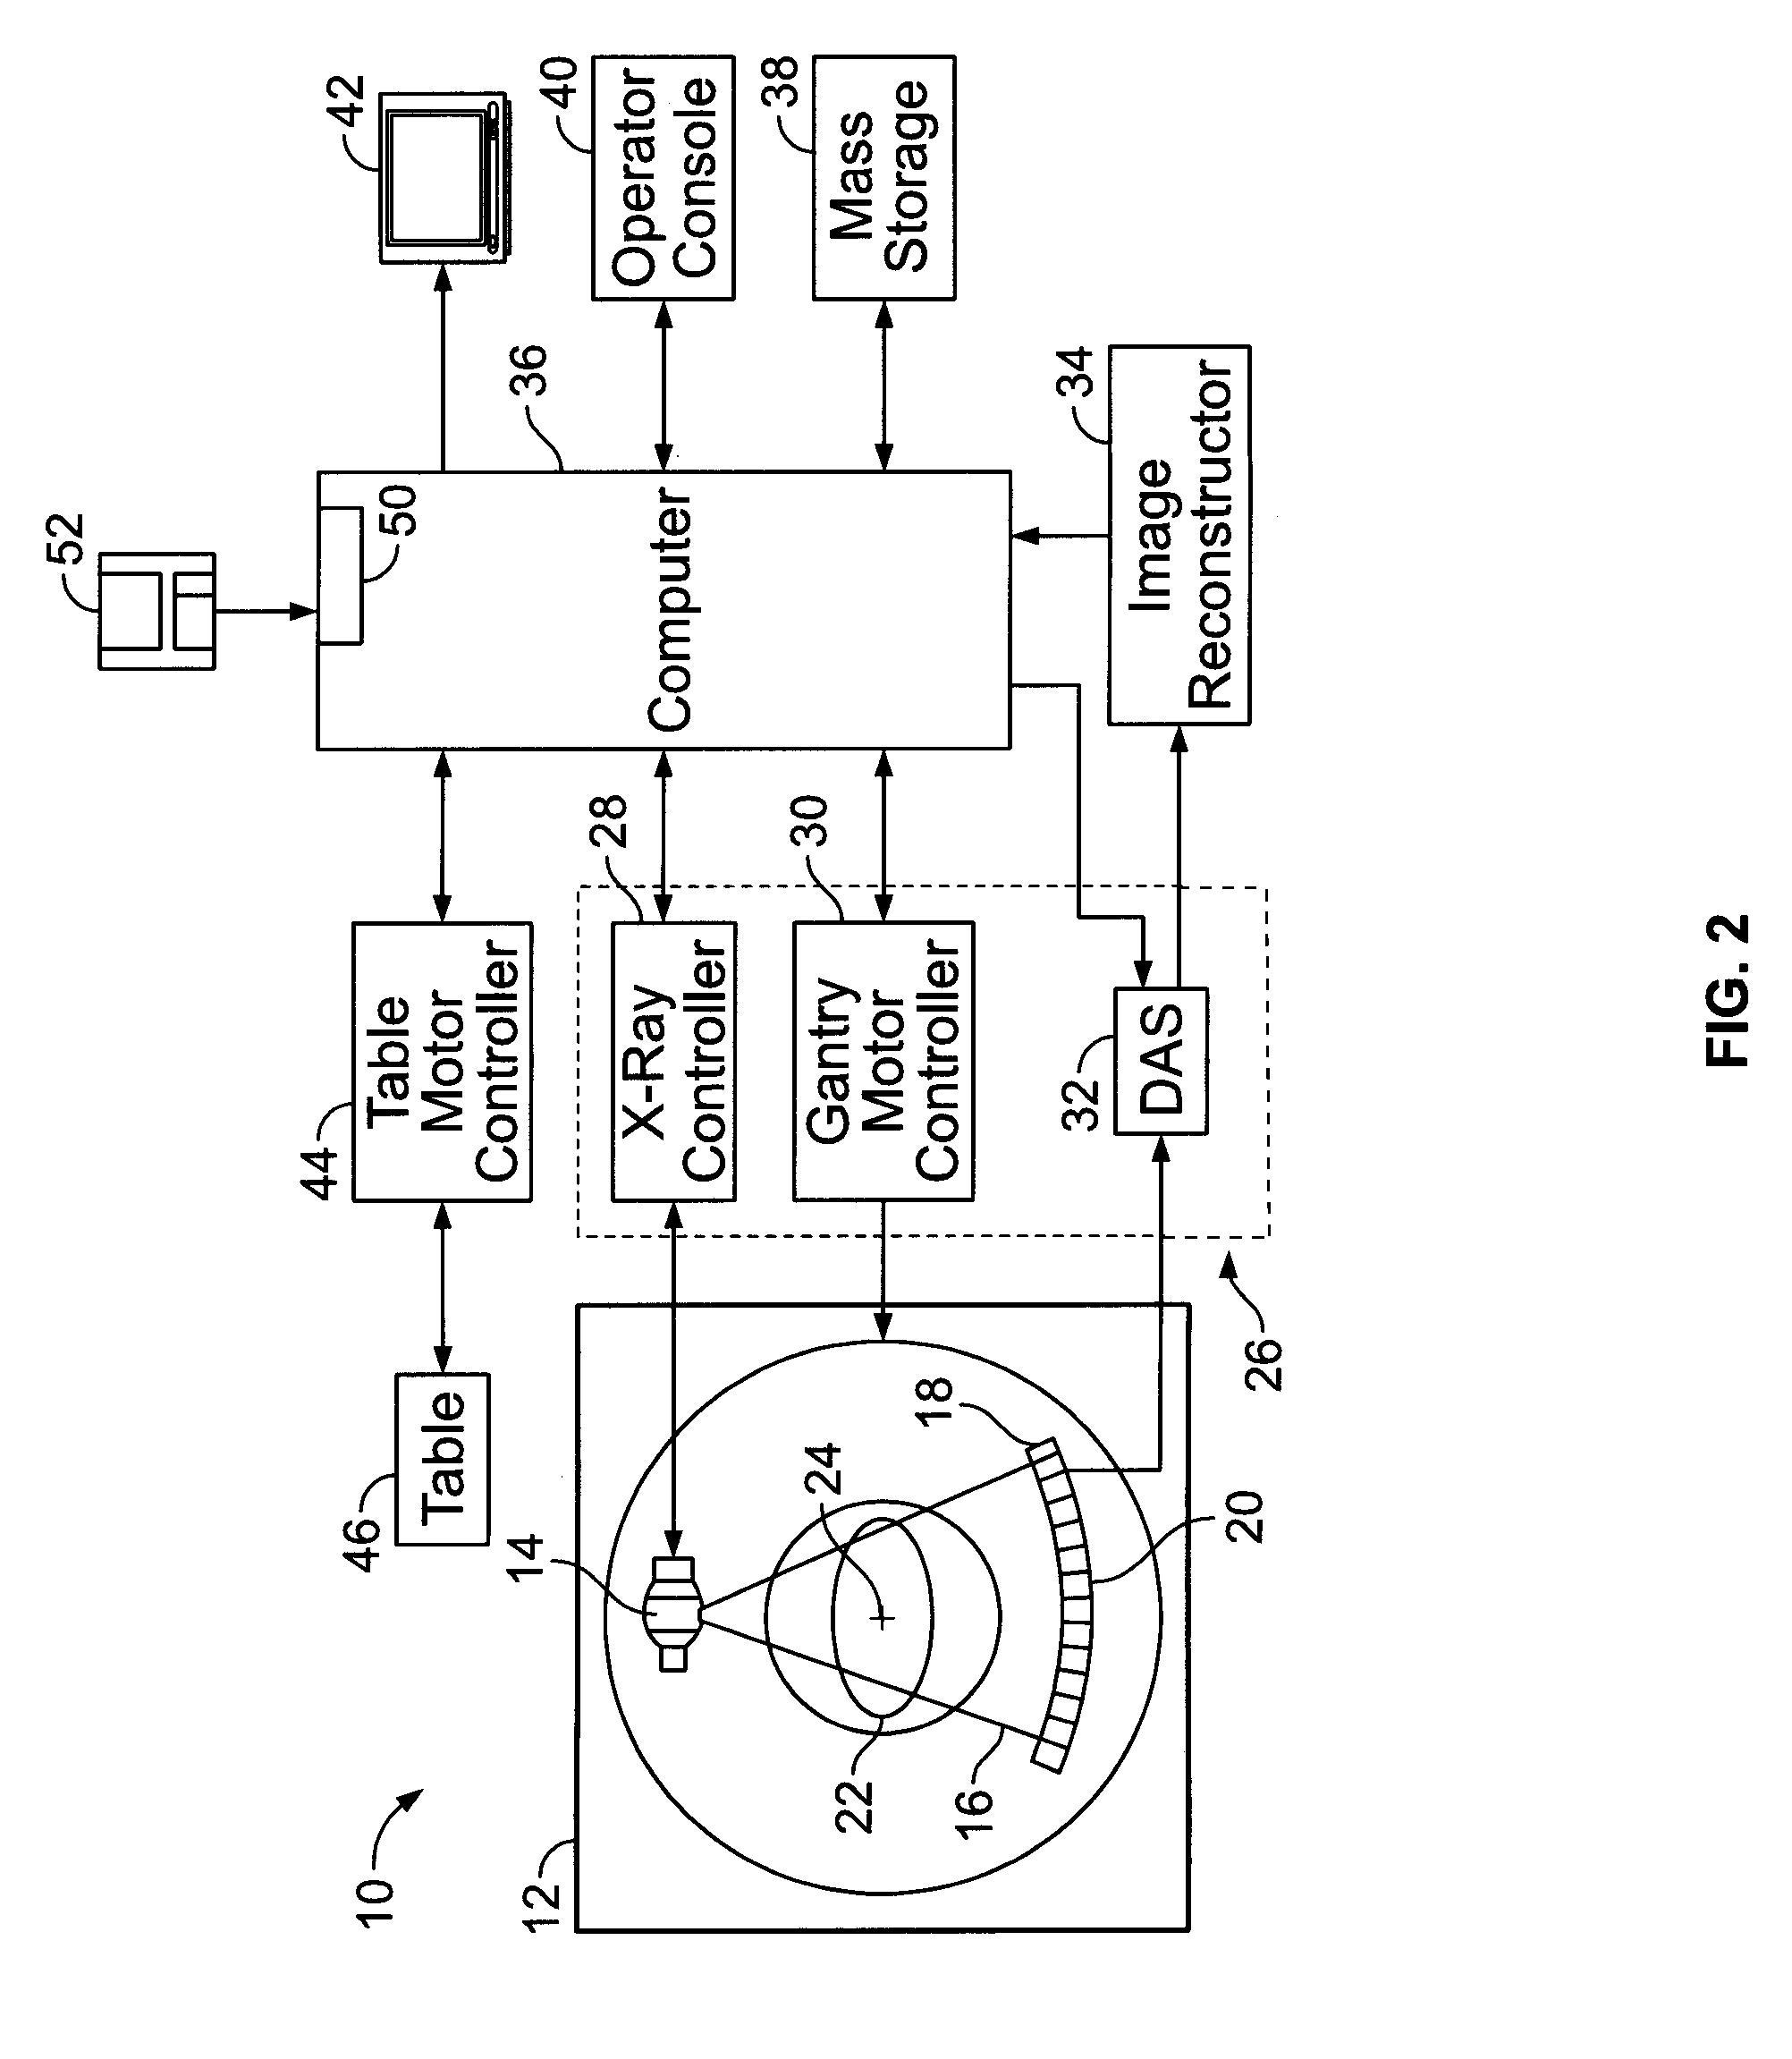 Methods and apparatus for x-ray imaging with focal spot deflection